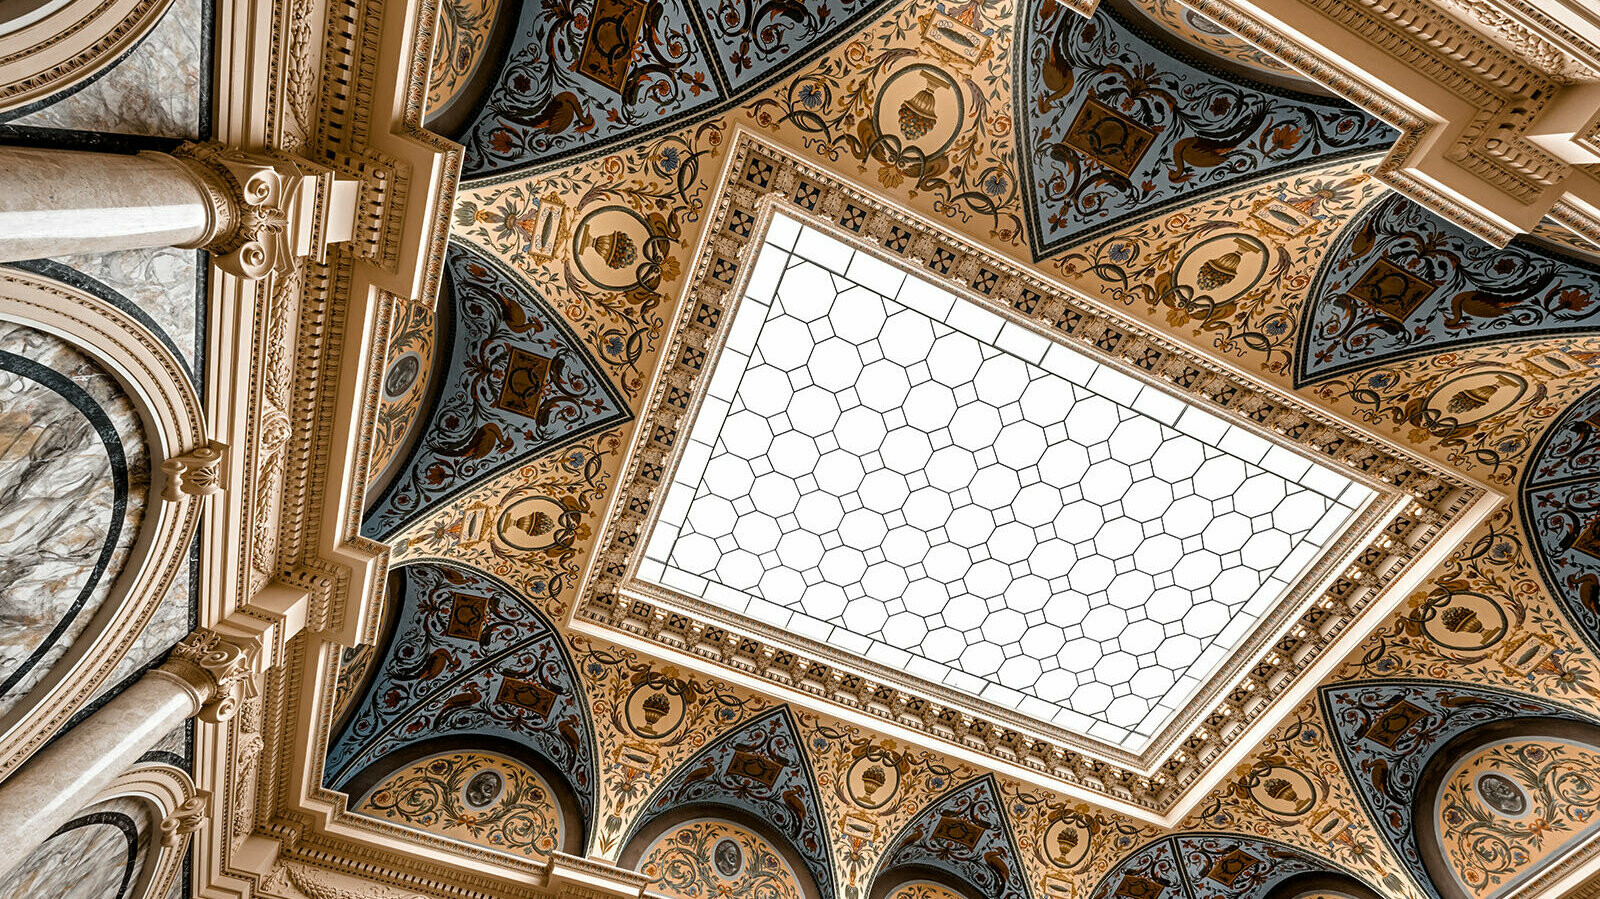 A picture of the artistically decorated ceiling of the Künstlerhaus in Vienna.